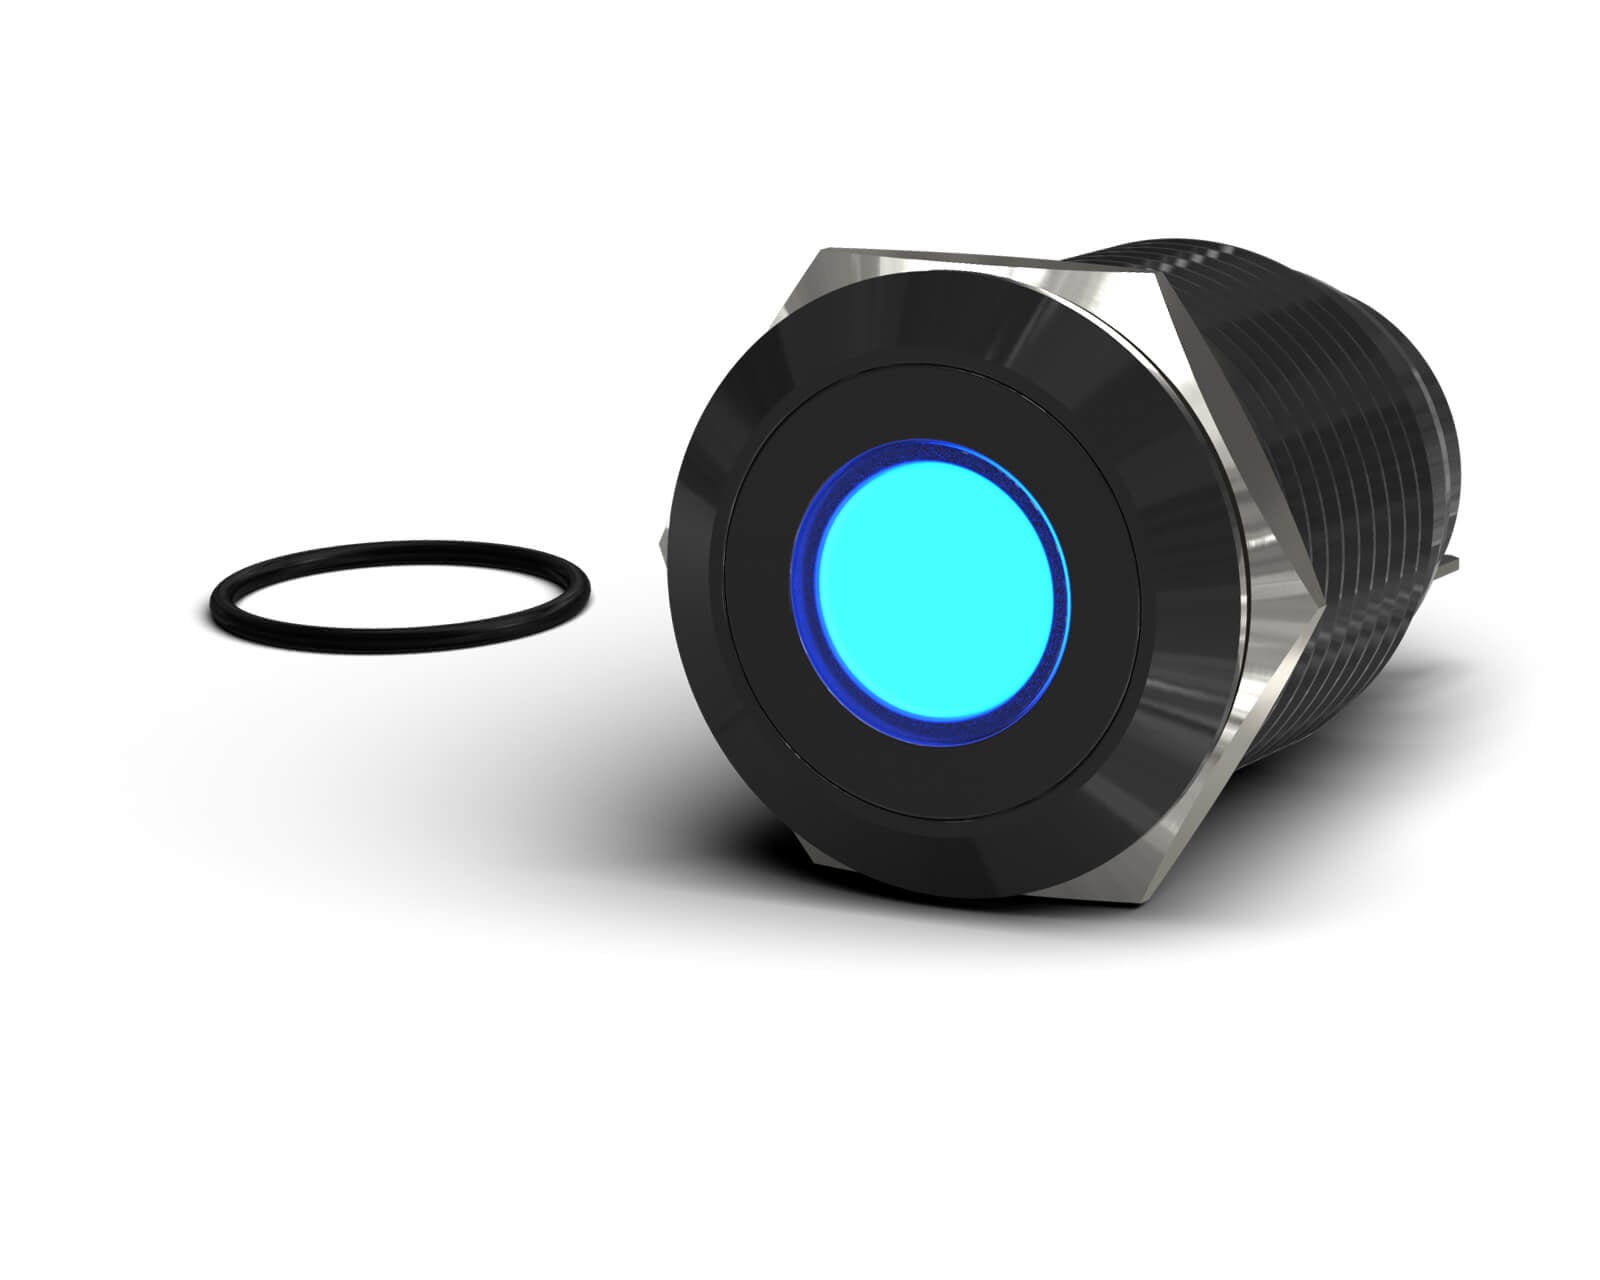 PrimoChill Black Aluminum Momentary Vandal Resistant Switch - 22mm - PrimoChill - KEEPING IT COOL Blue LED Dot